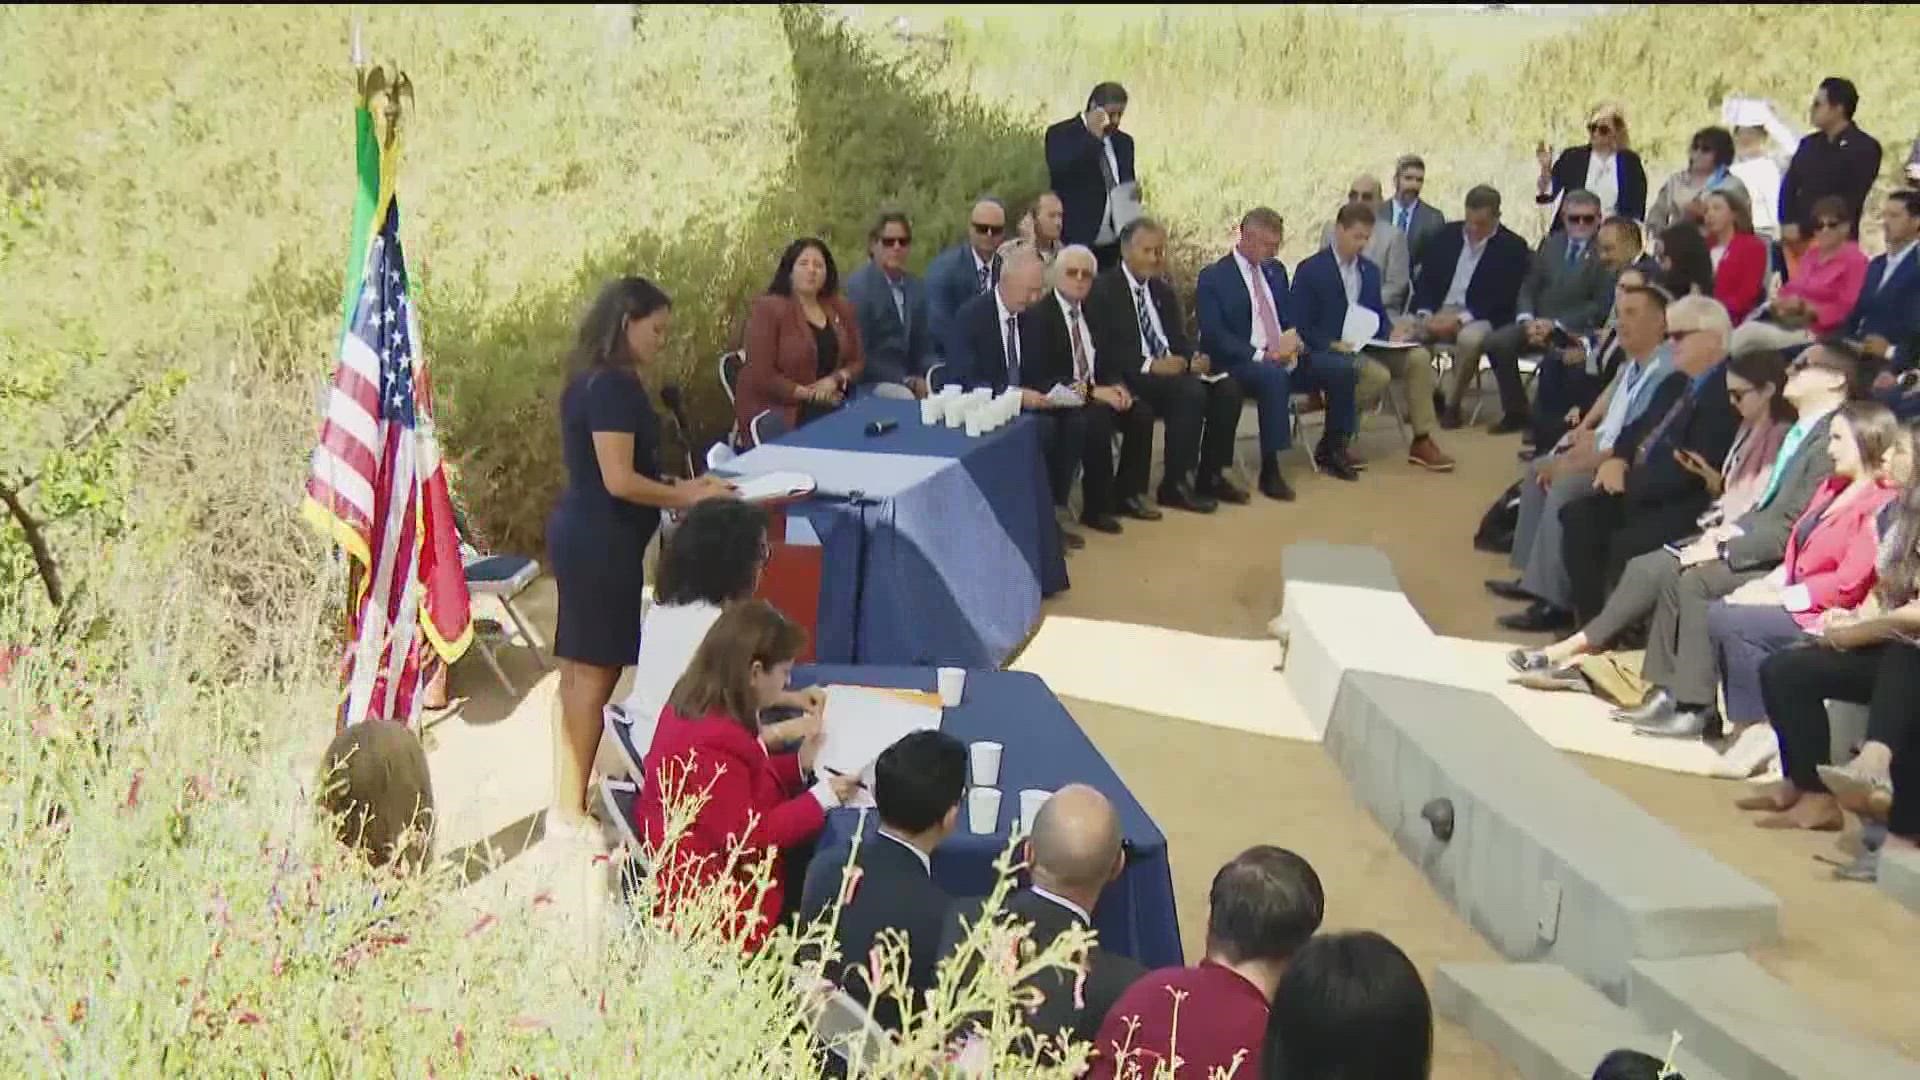 The ceremony comes about a month after another two sewage lines broke, dumping millions of gallons into the Tijuana River.